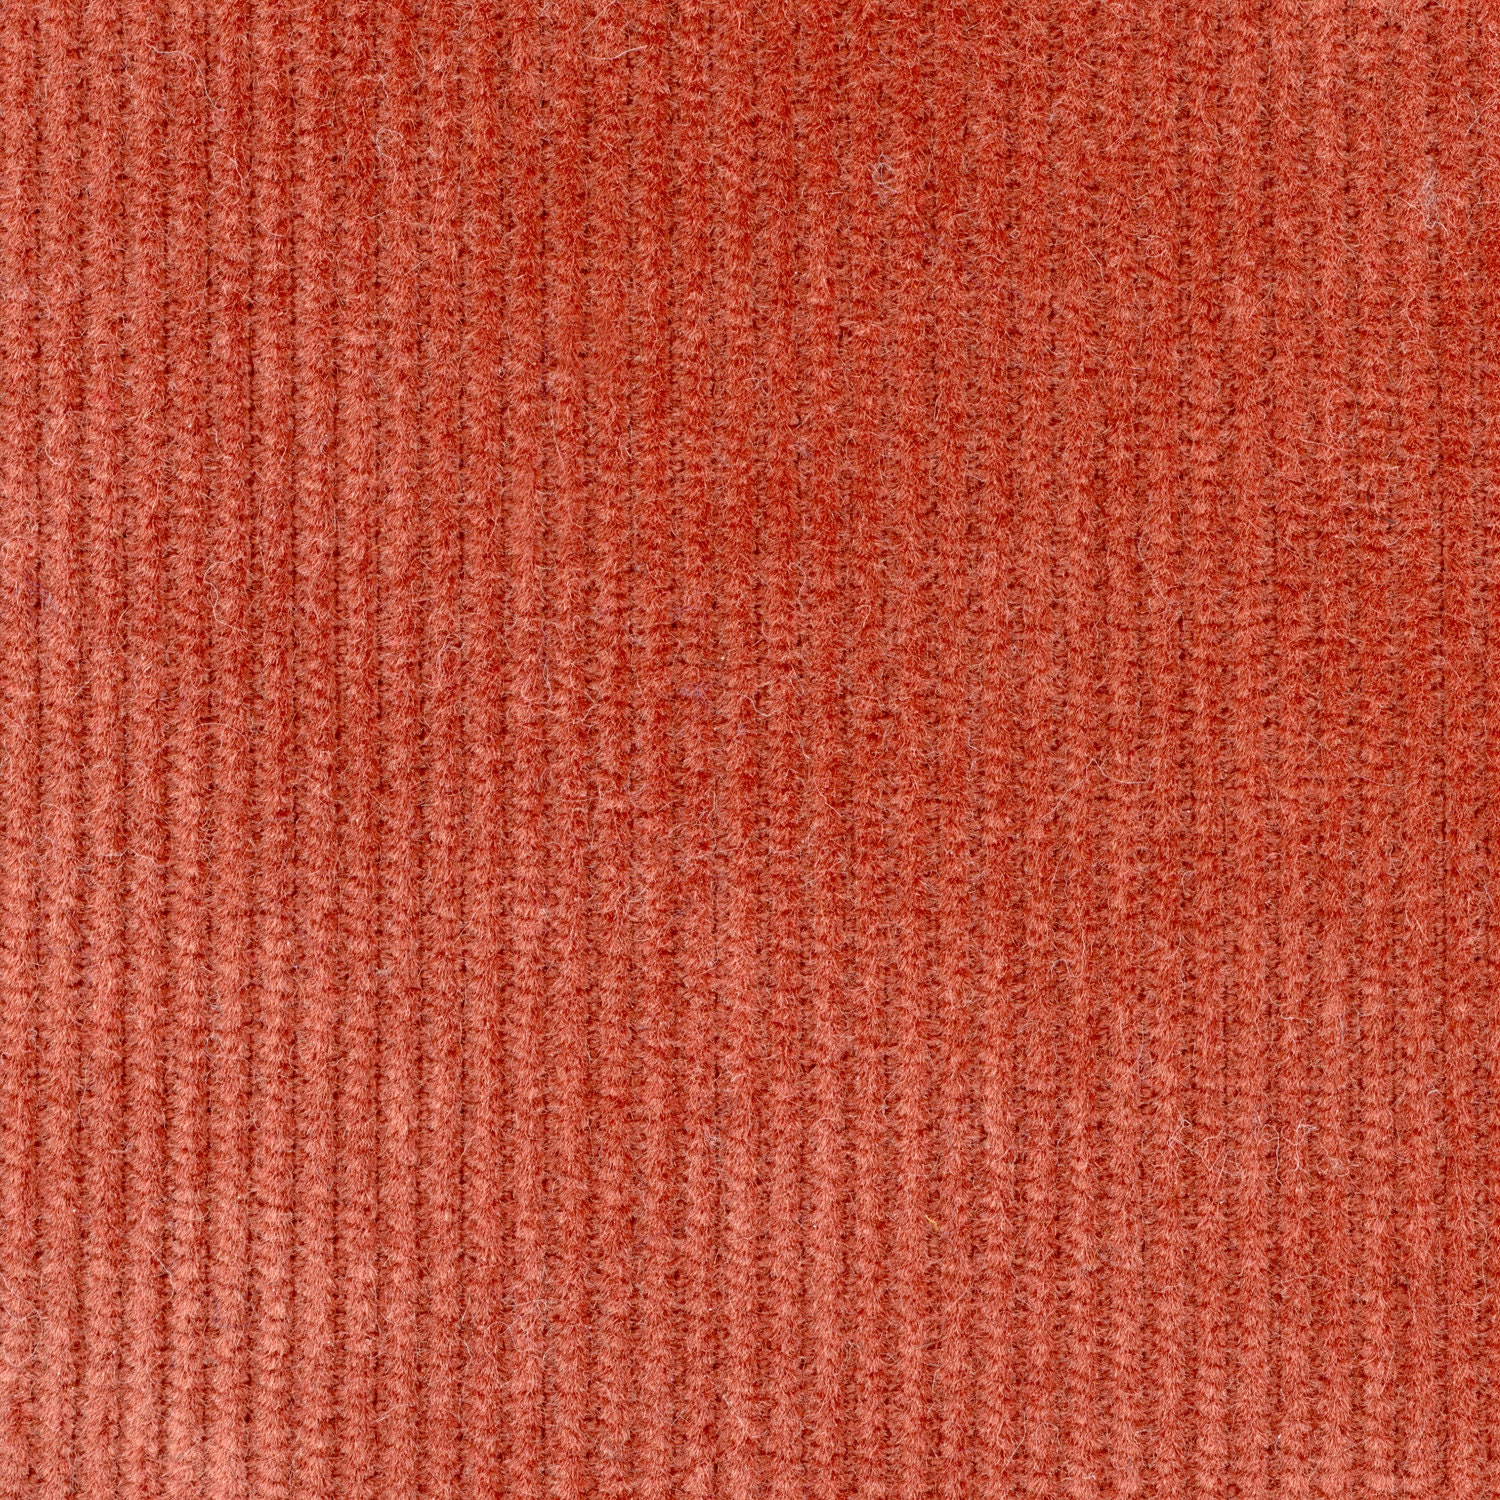 Simple Red Knit | Fabric Texture | Photoshop Texture | Graphic Design  Resource | High-Resolution Scan | Instant Digital Download